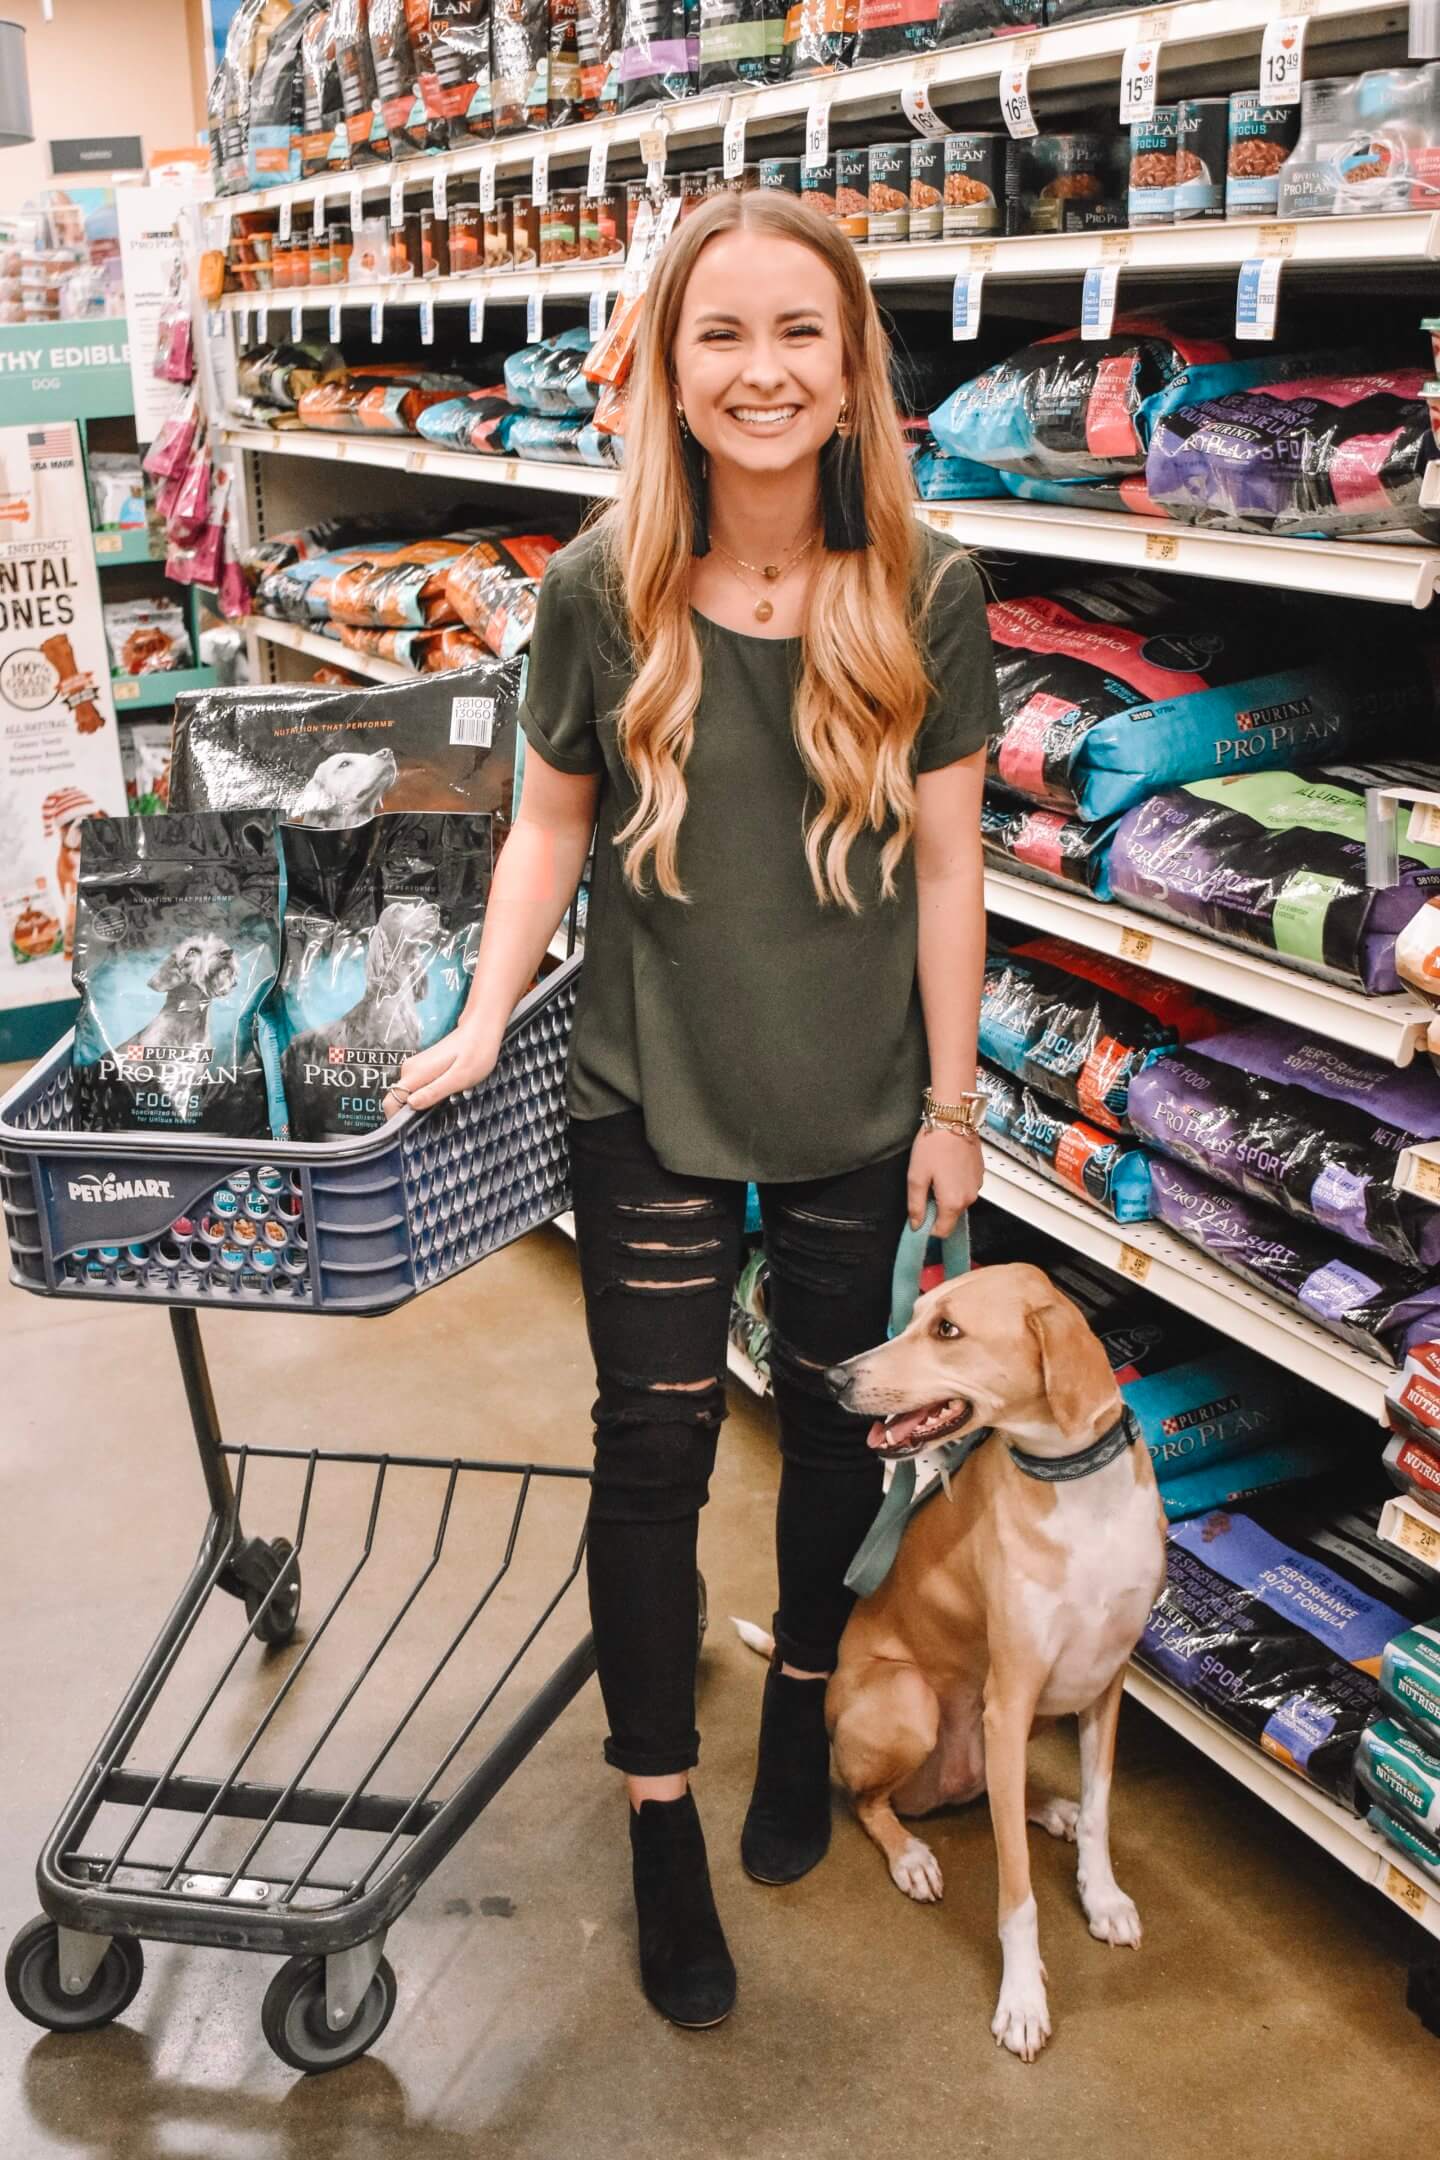 Why I stick to Purina Pro Plan Focus dog food. Quinn has been eating Purina Pro Plan her whole life, and we love shopping for her food at Petsmart. My experience at Petsmart and why we choose Purina. The Blonder Life